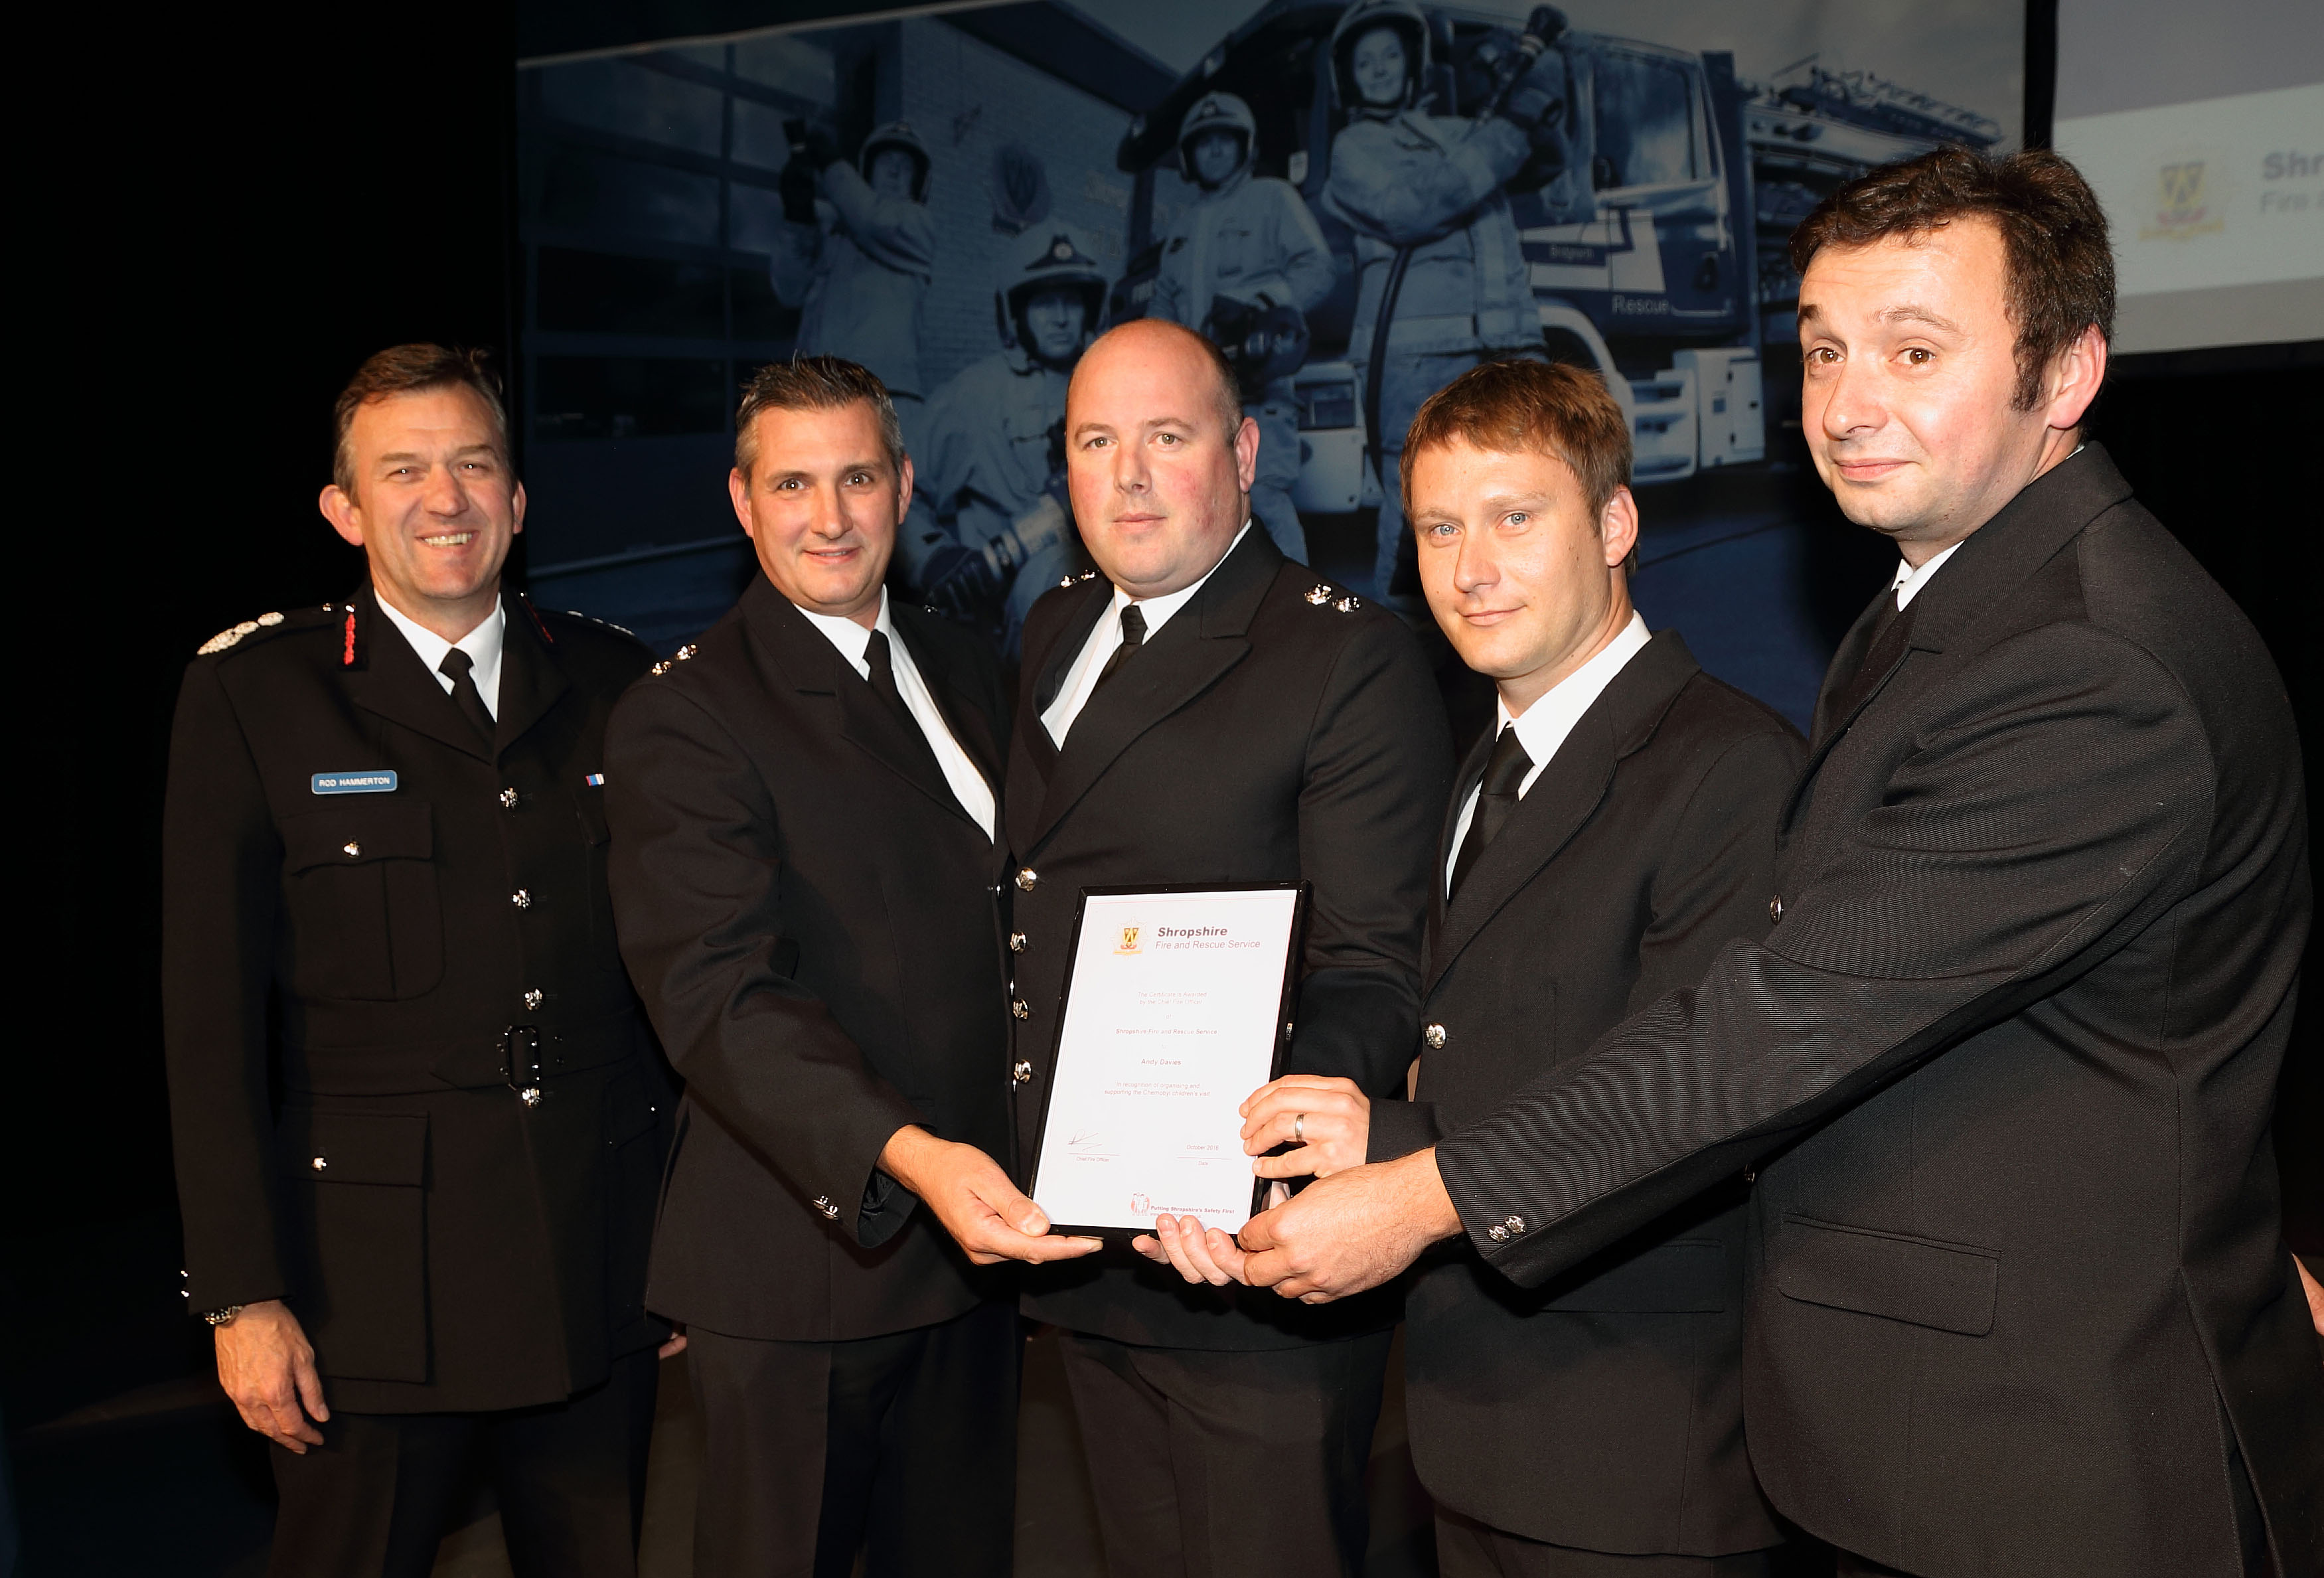 Blue Watch Shrewsbury received an award for their work with children from Chernobyl. Pictured with Chief Fire Officer Rod Hammerton are, left to right, Paul Gray, Richard Meadows, Andy Davies and Graham Carless.